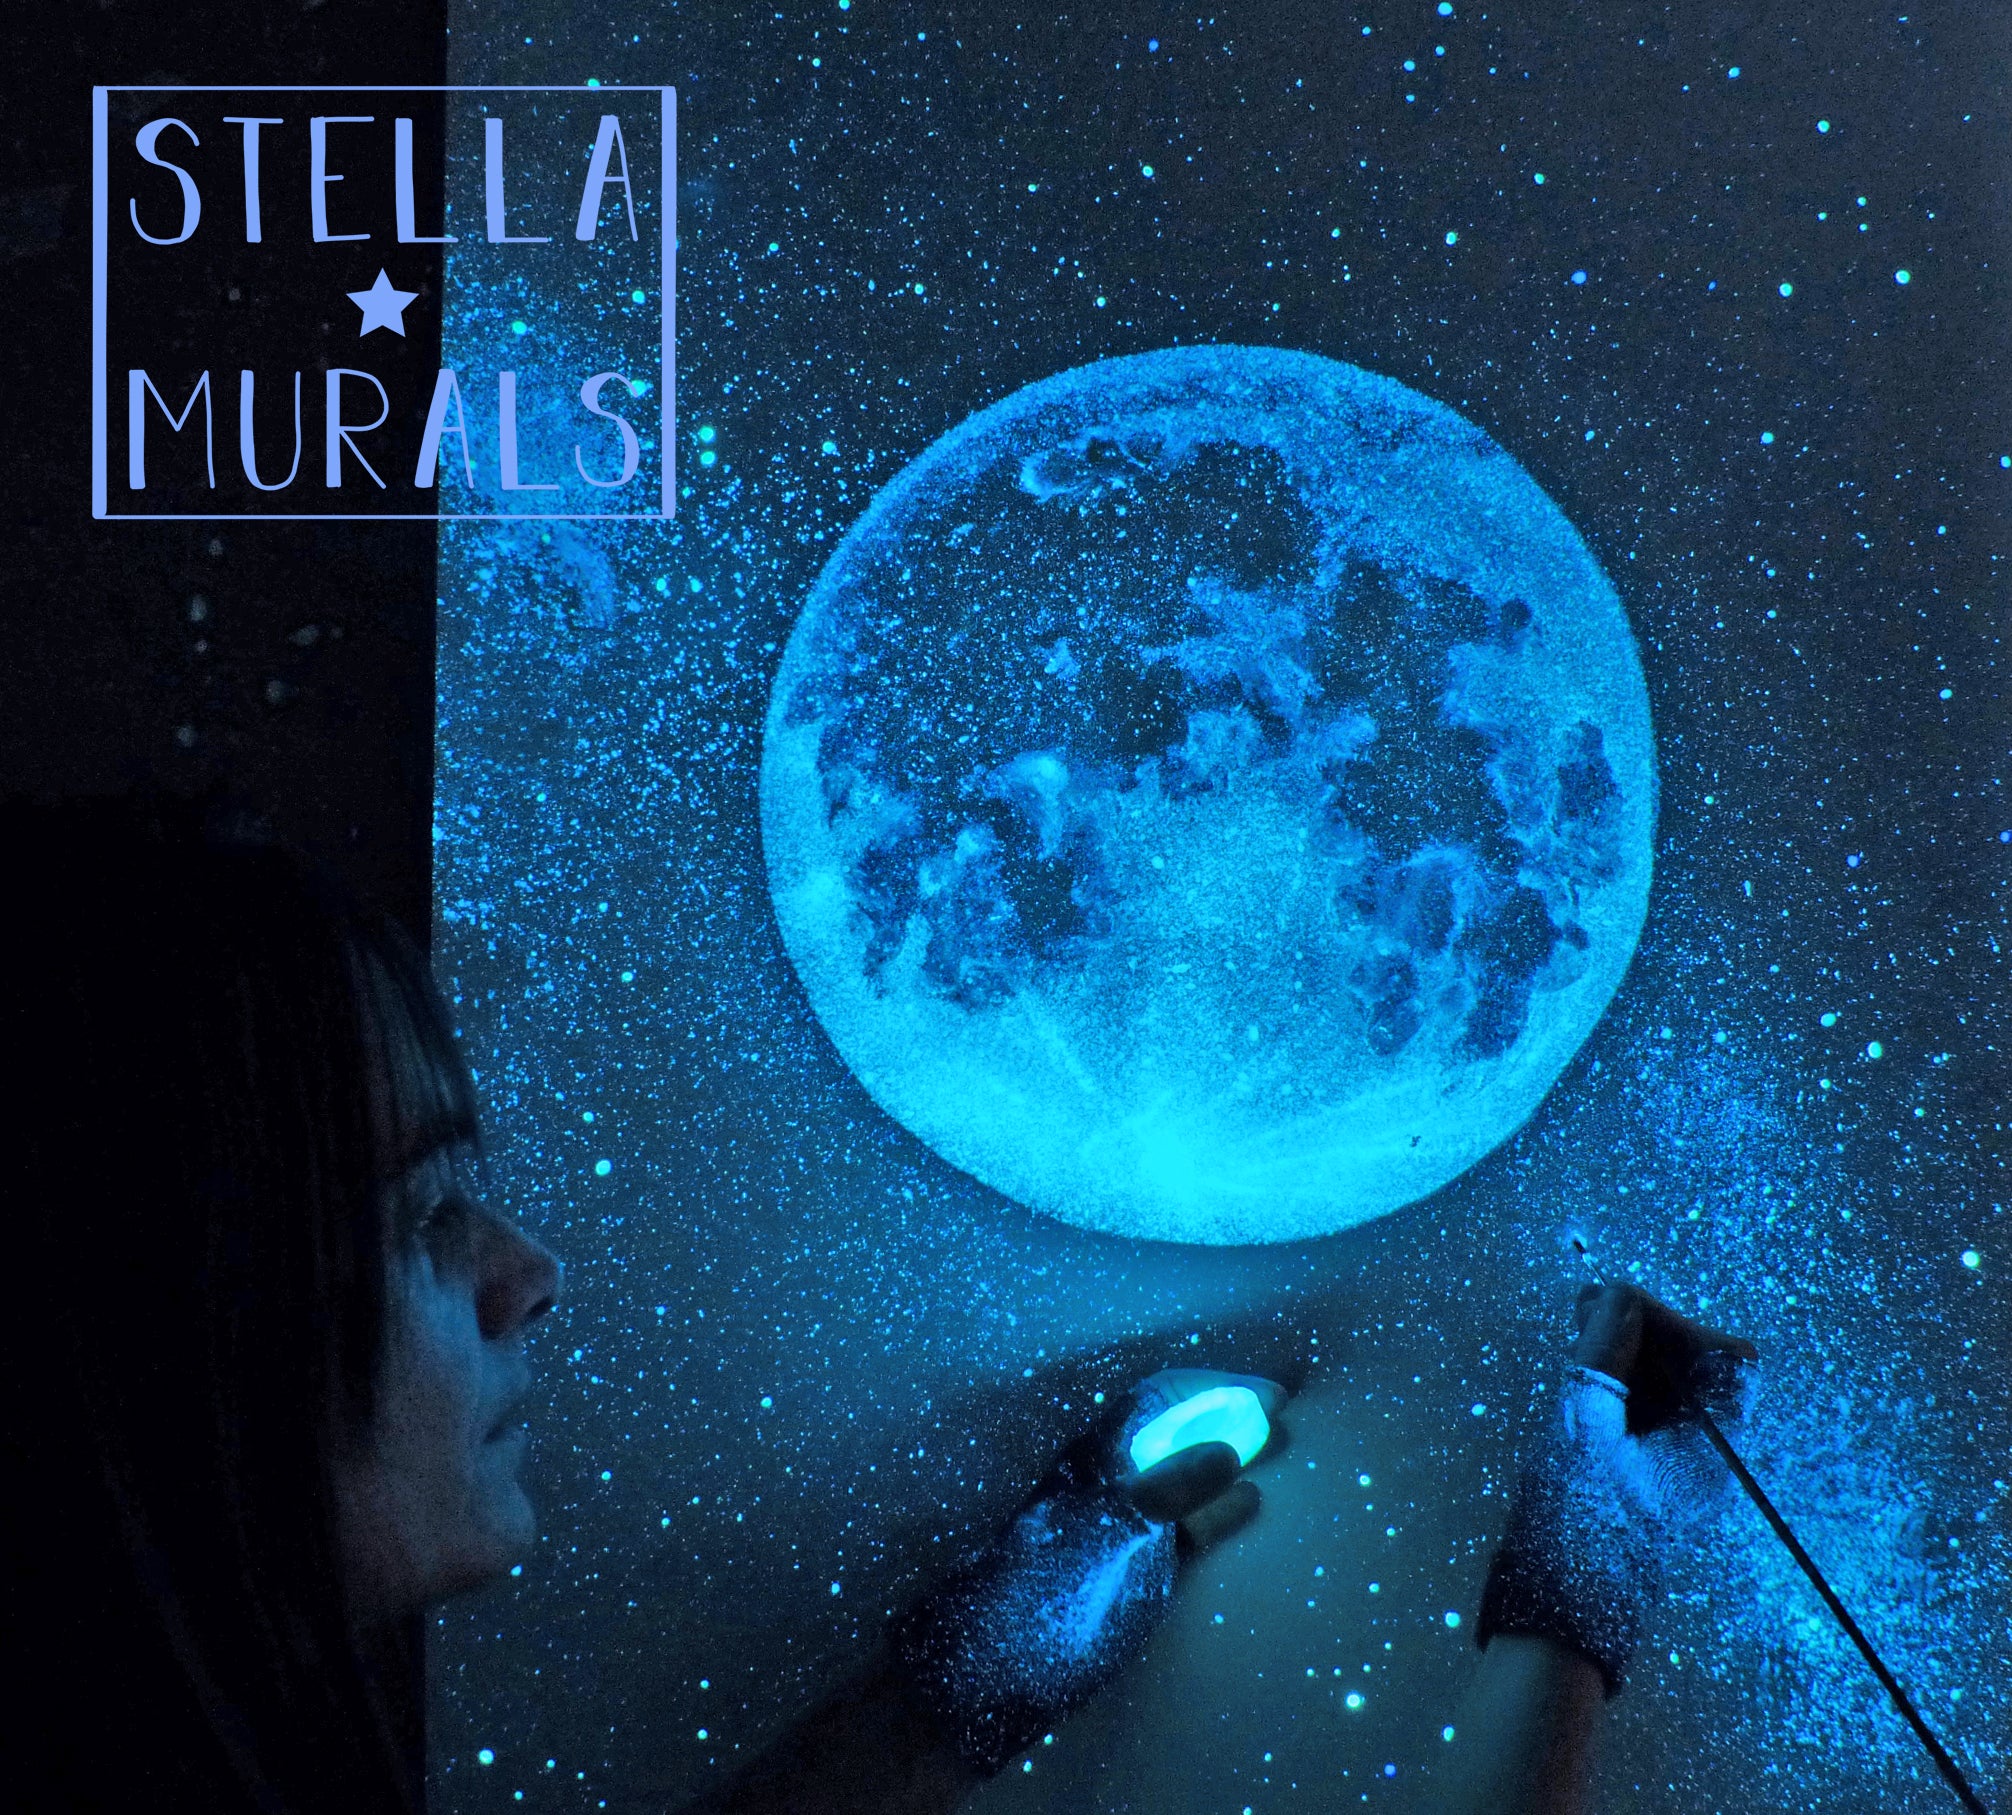 glow in the dark artist esther at stella murals painting moon mural